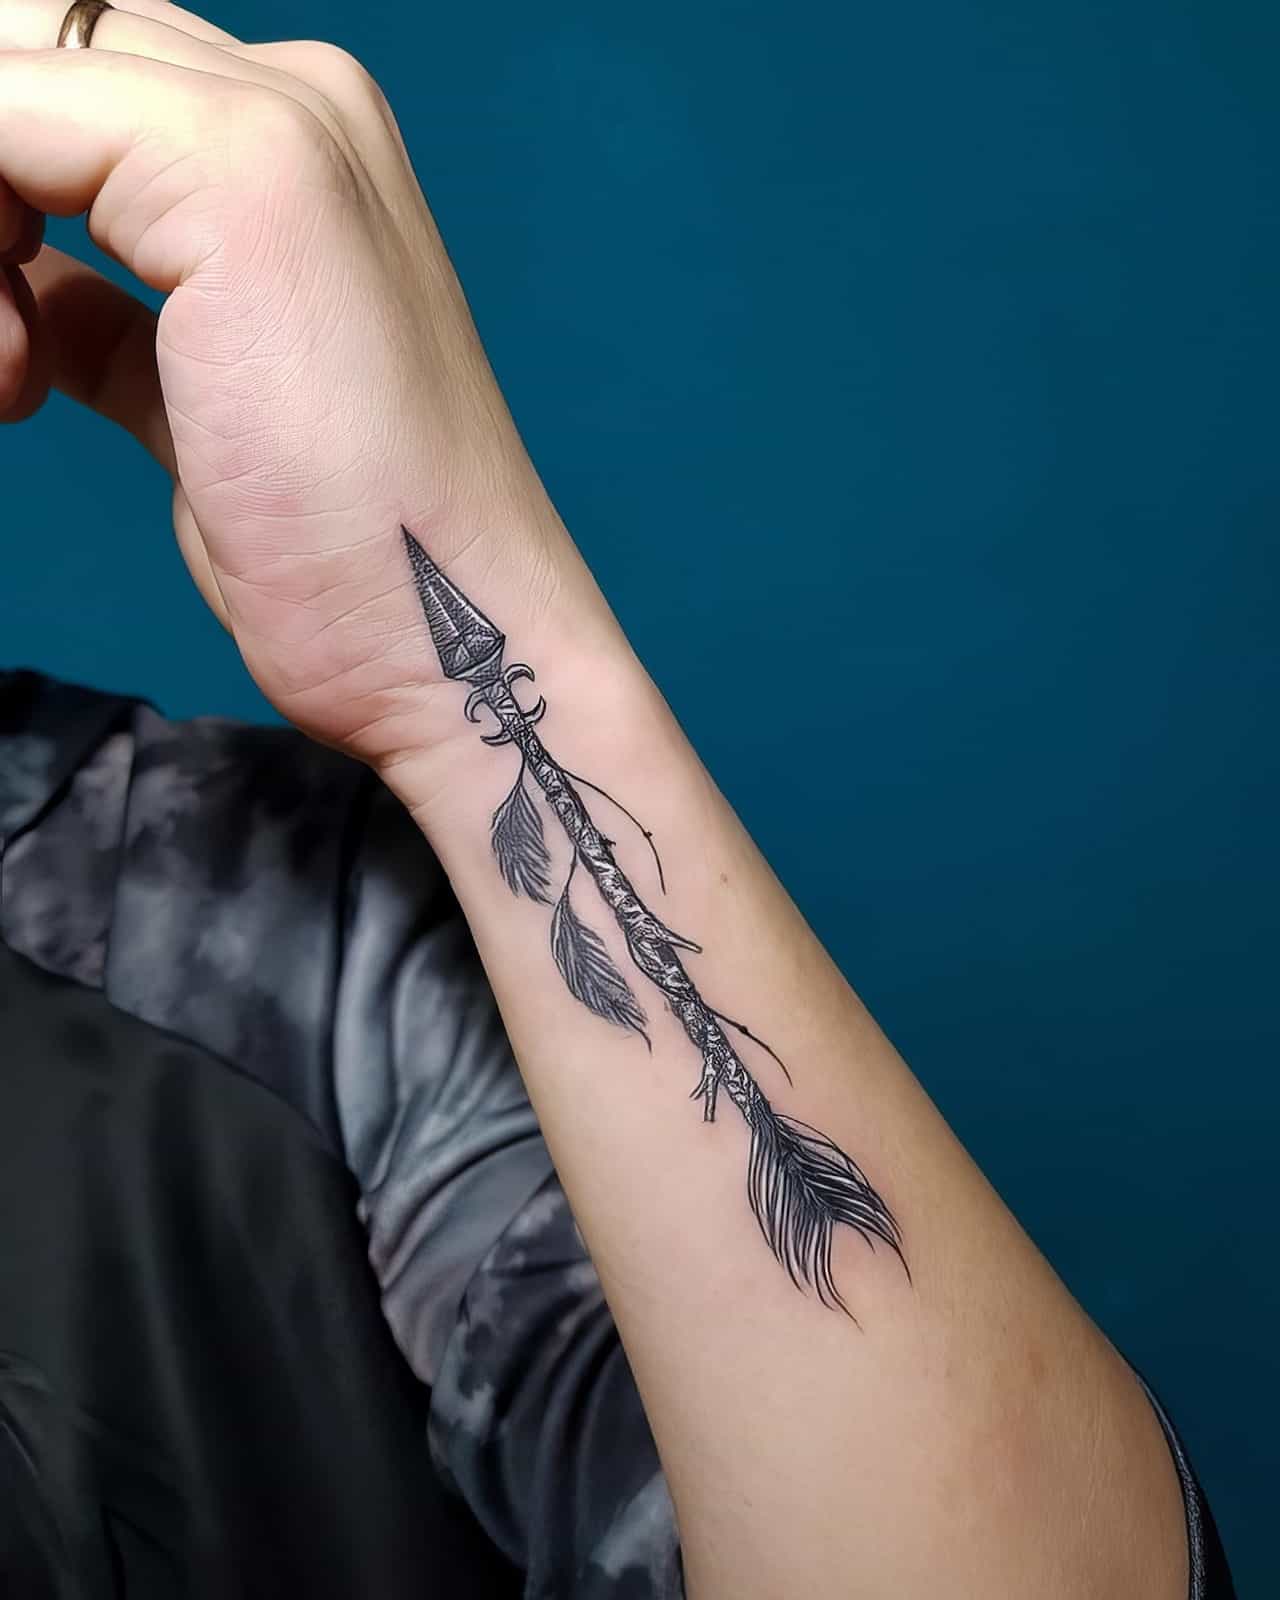 Unique Arrow Tattoos Design with Meanings - So Simple Yet Meaningful | Arrow  tattoos for women, Arrow tattoo design, Tattoo designs and meanings